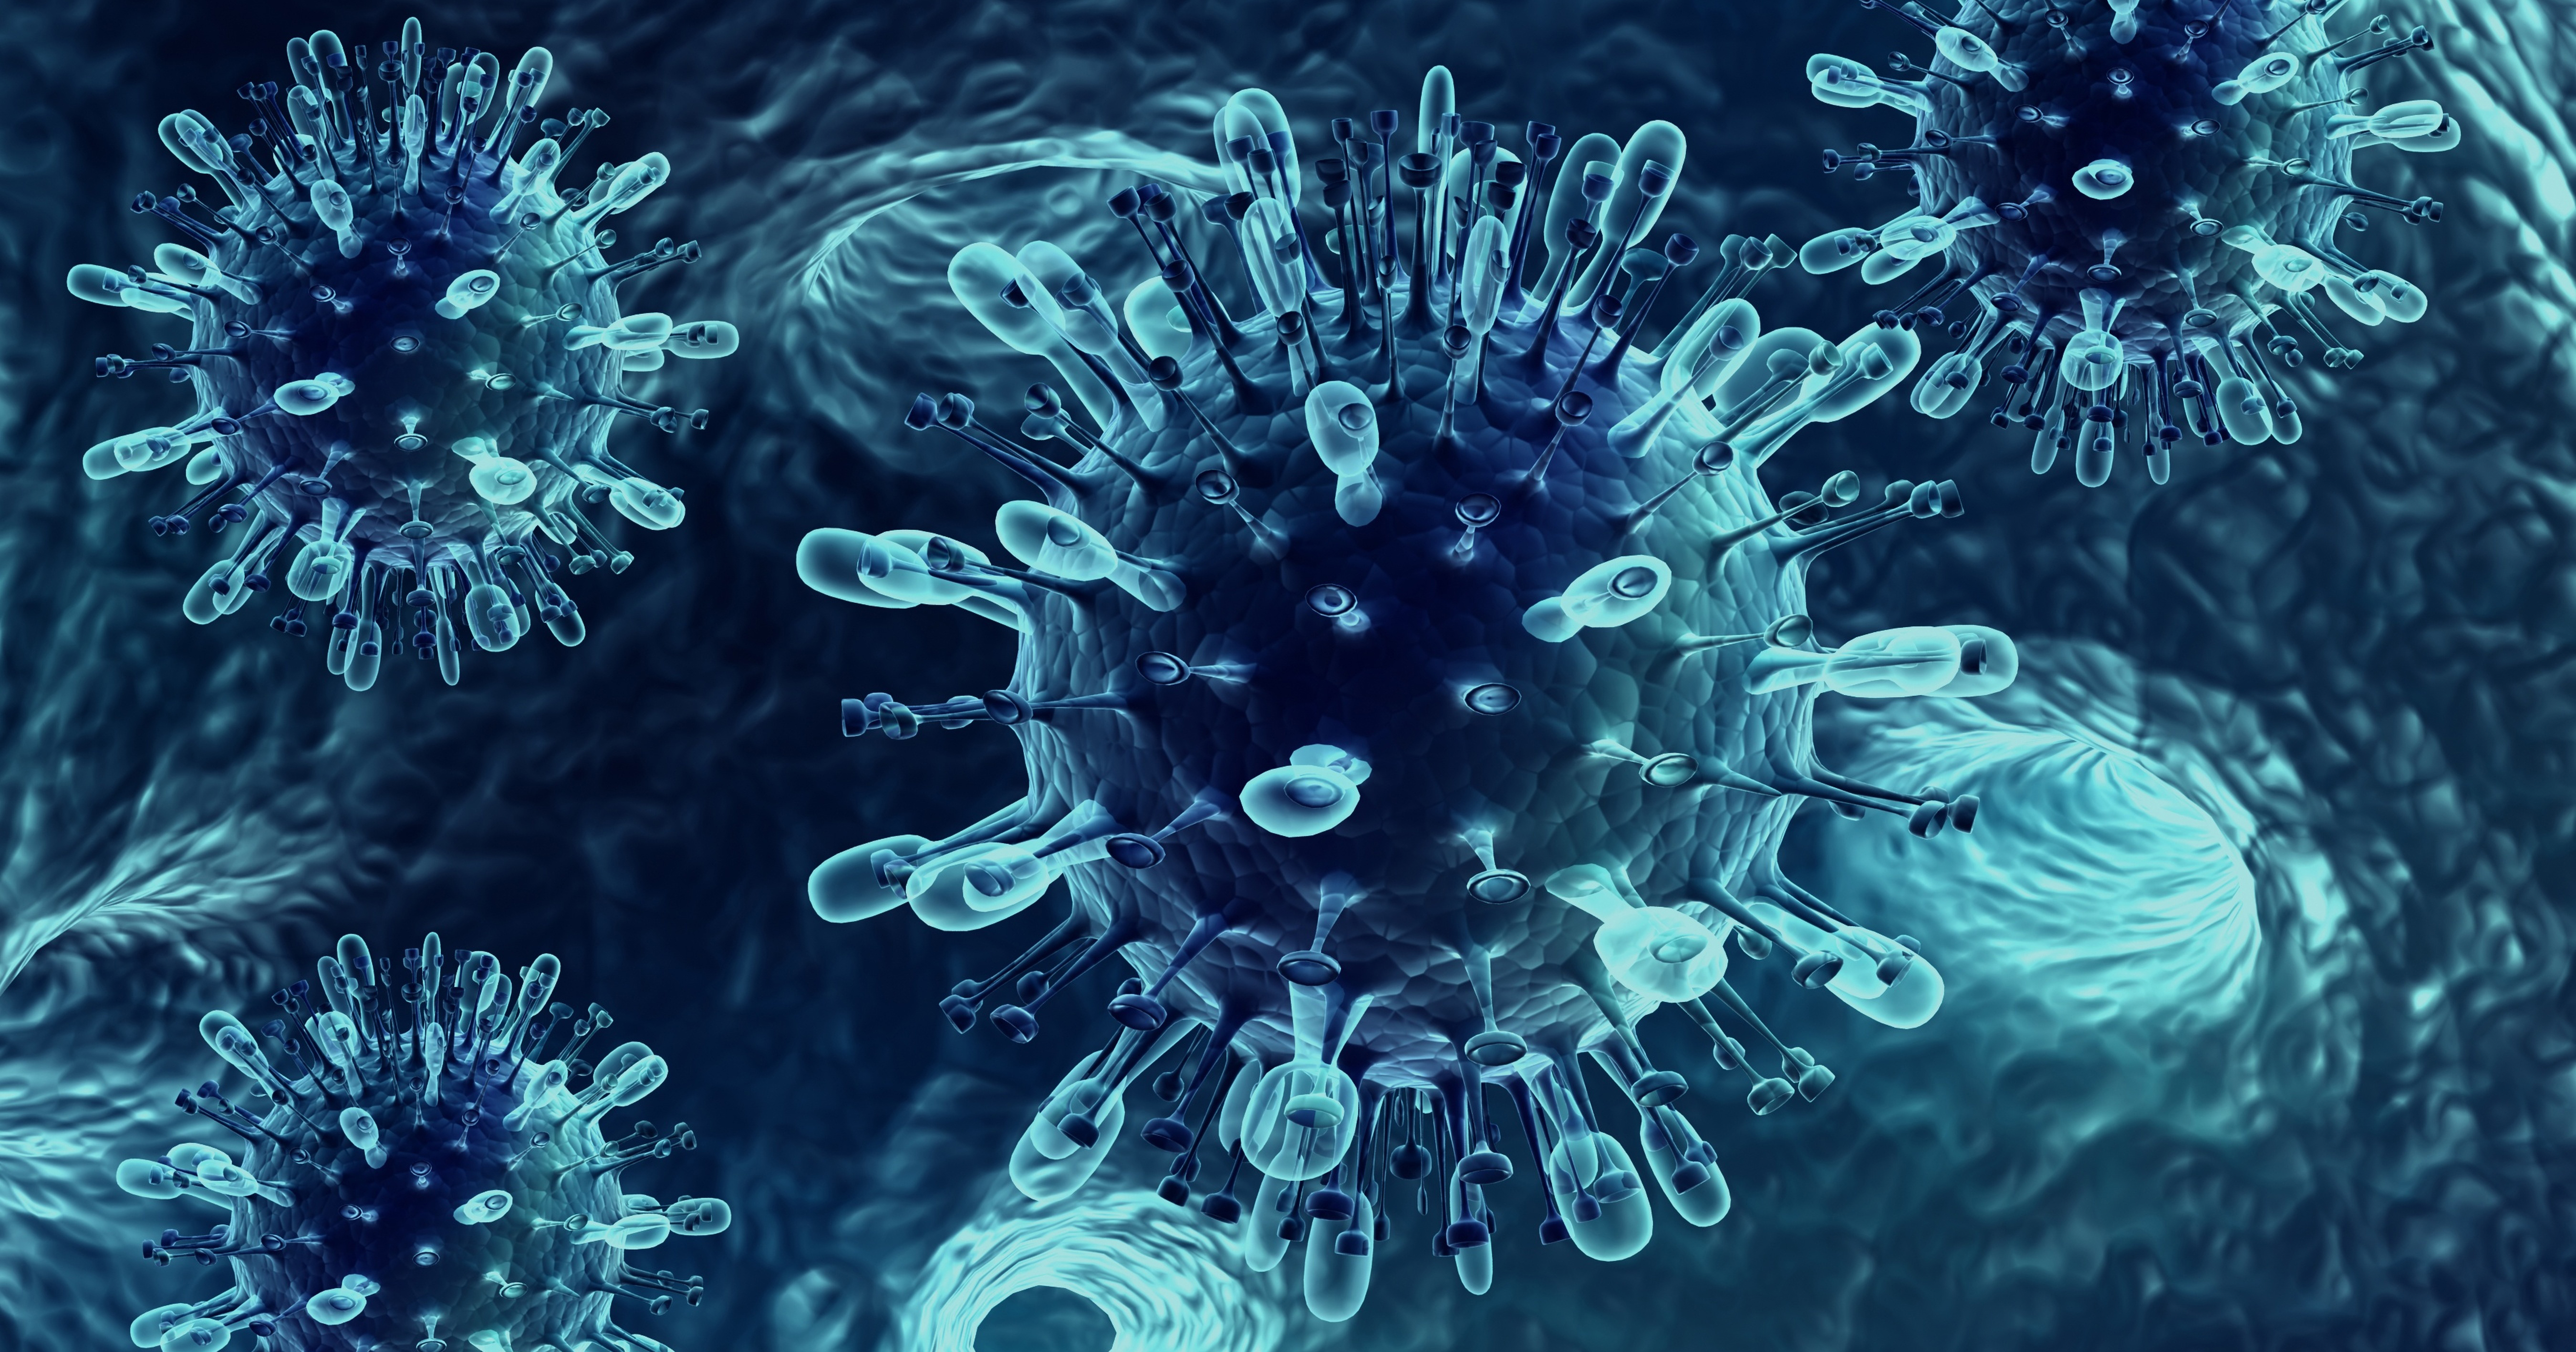 Image of a virus cell